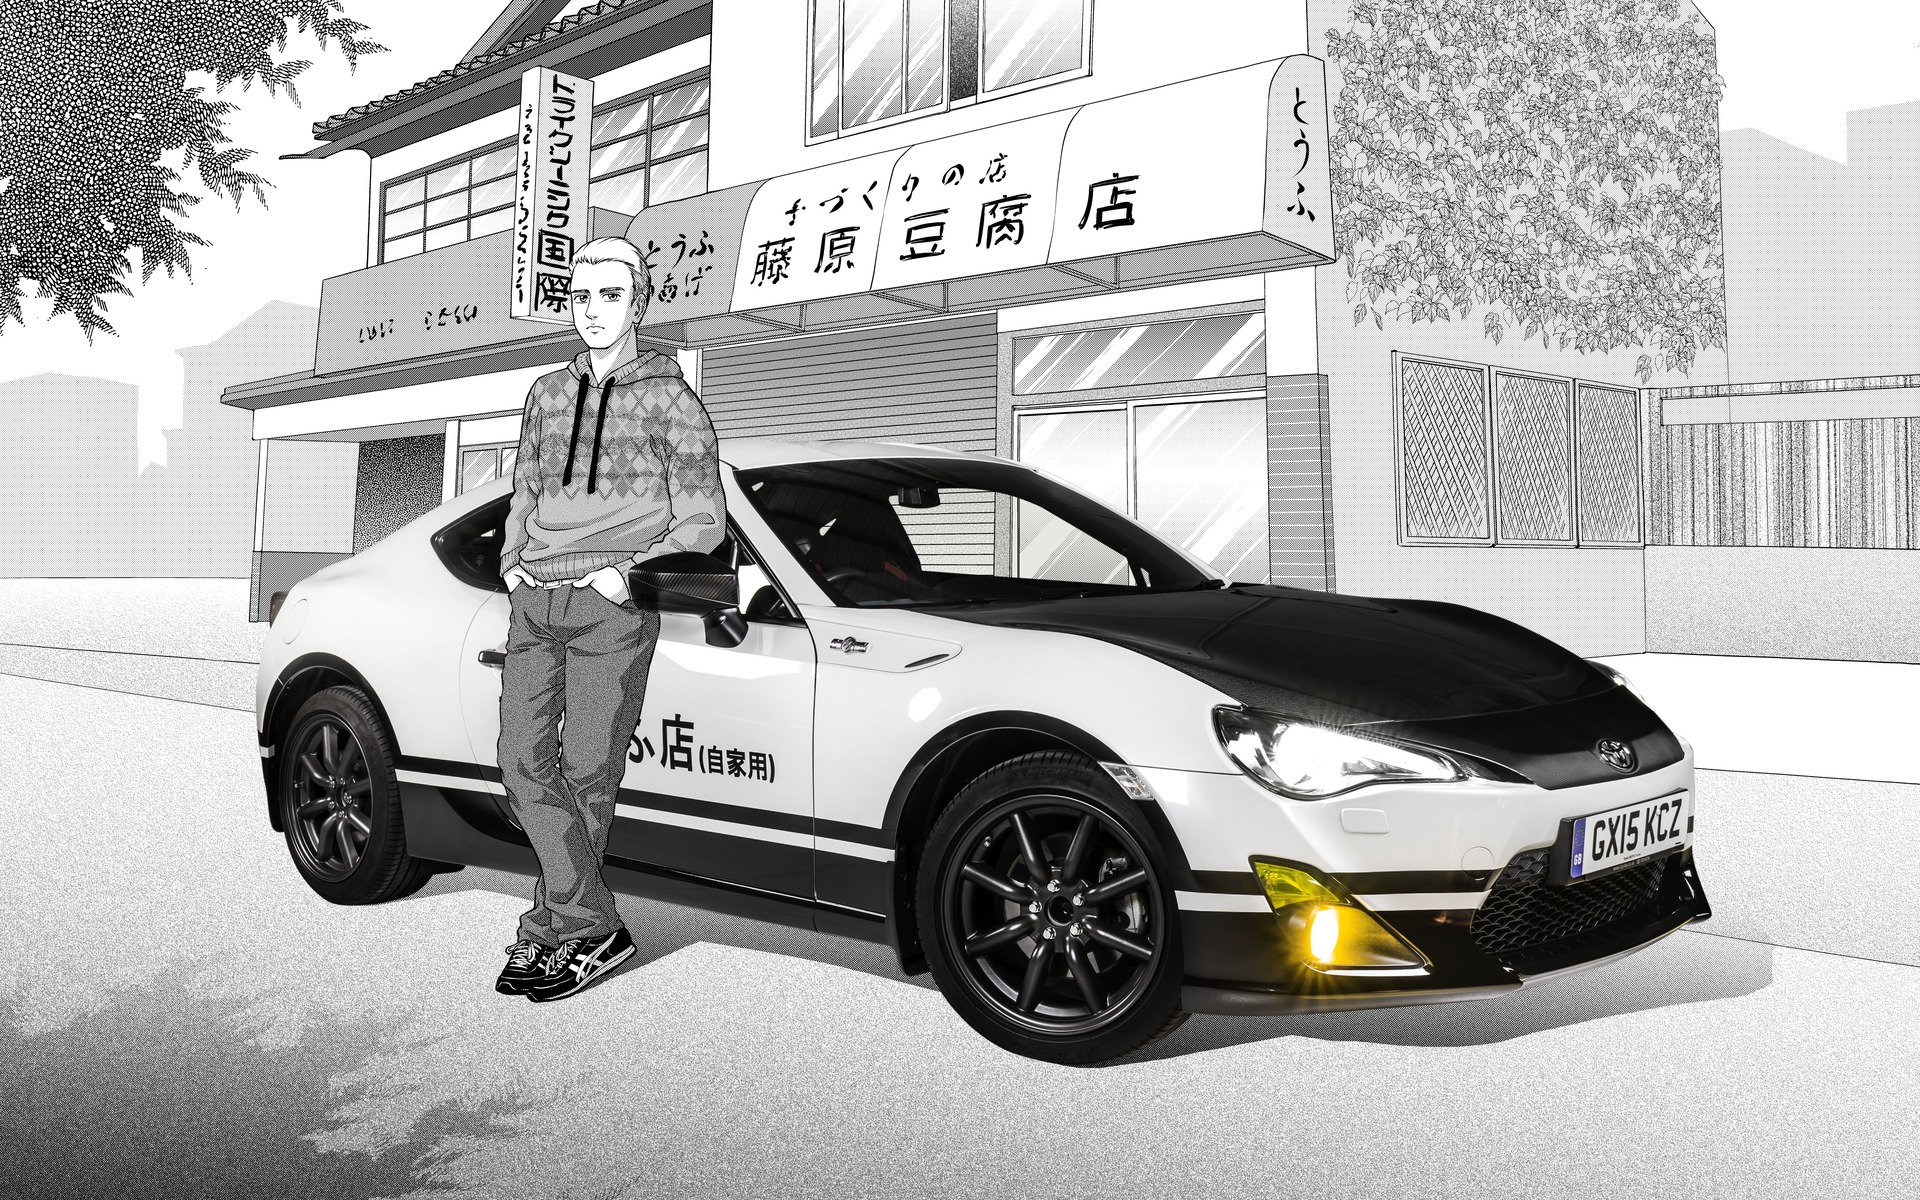 Toyota S Hommage To Initial D The Car Guide